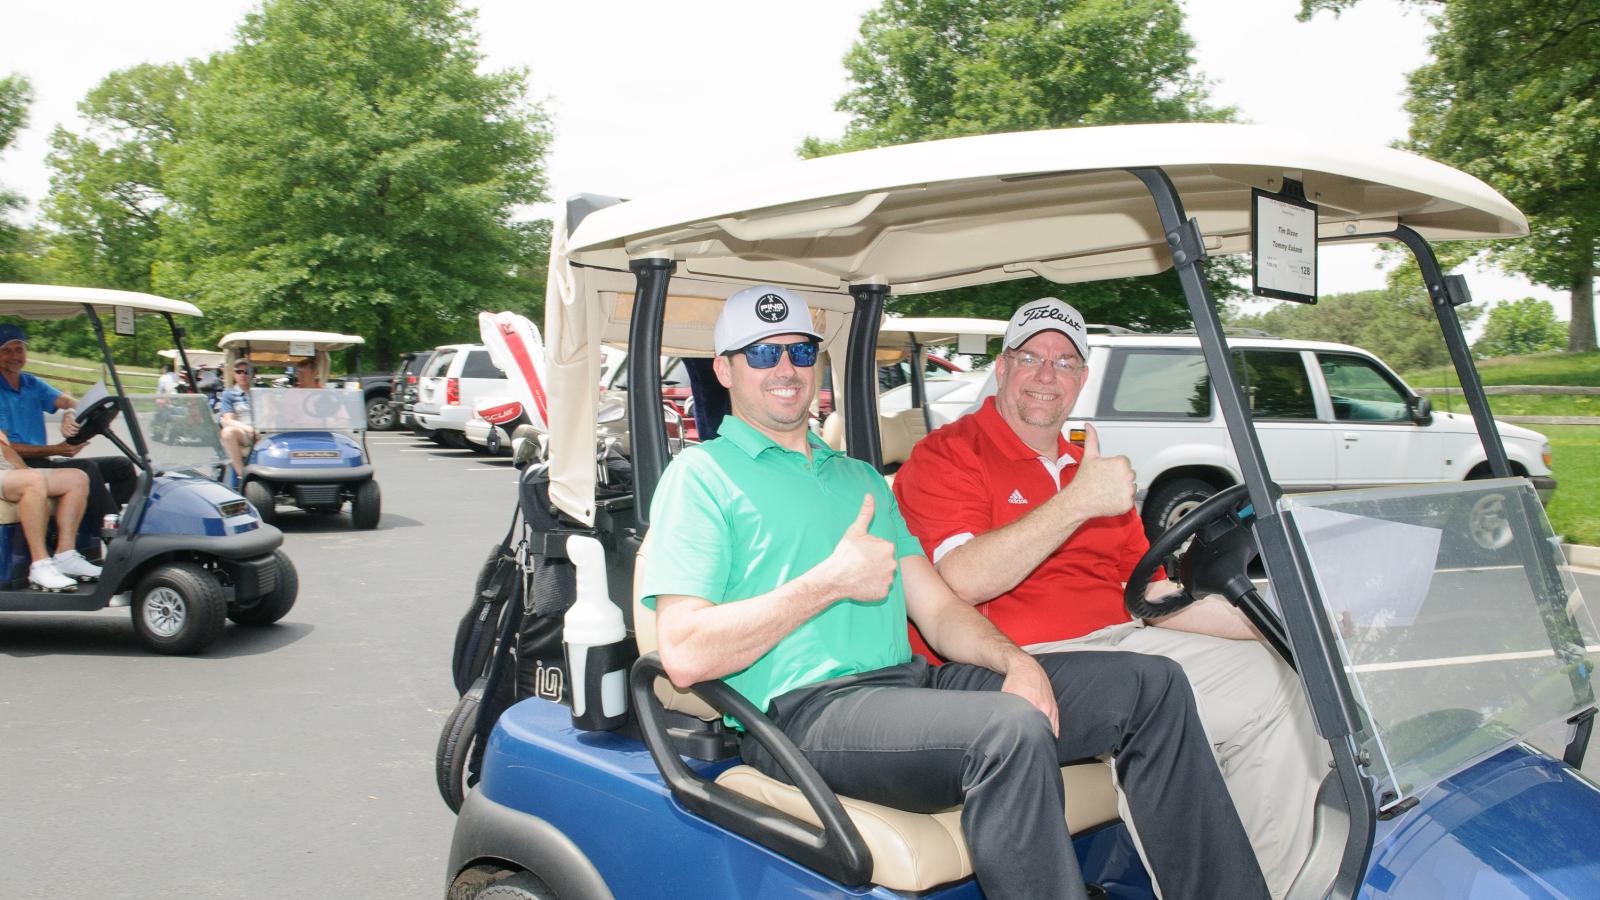 Golfers giving a thumbs-up in a golf cart